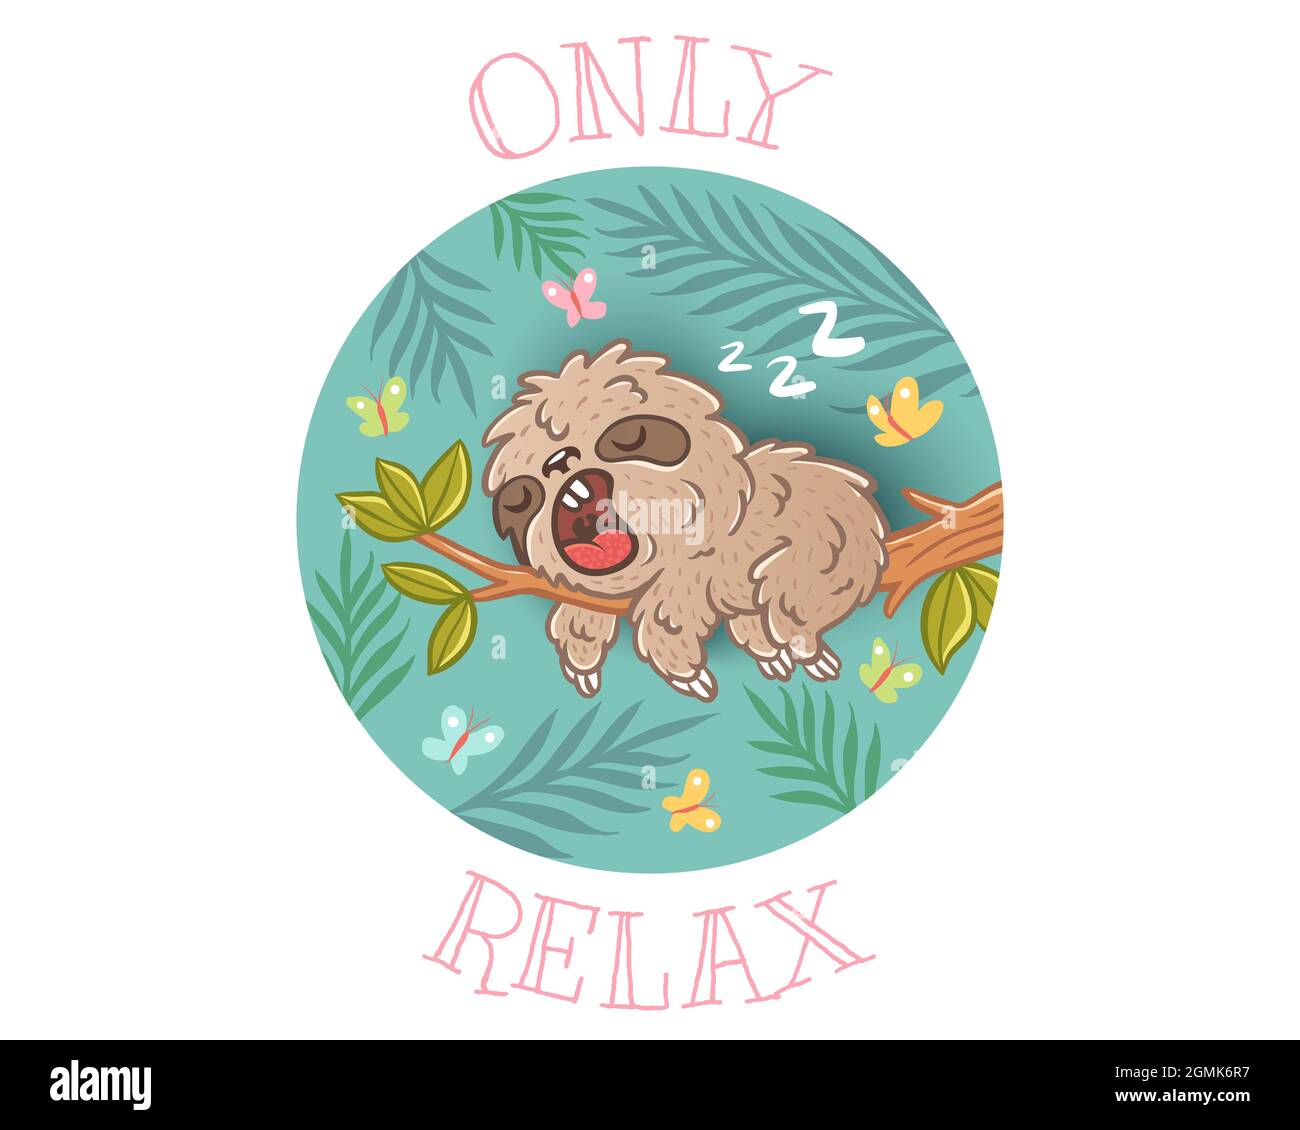 Vector illustration of a sleep sloth on branch with green leaves. Sloth and butterflyes. Only relax. Stock Vector